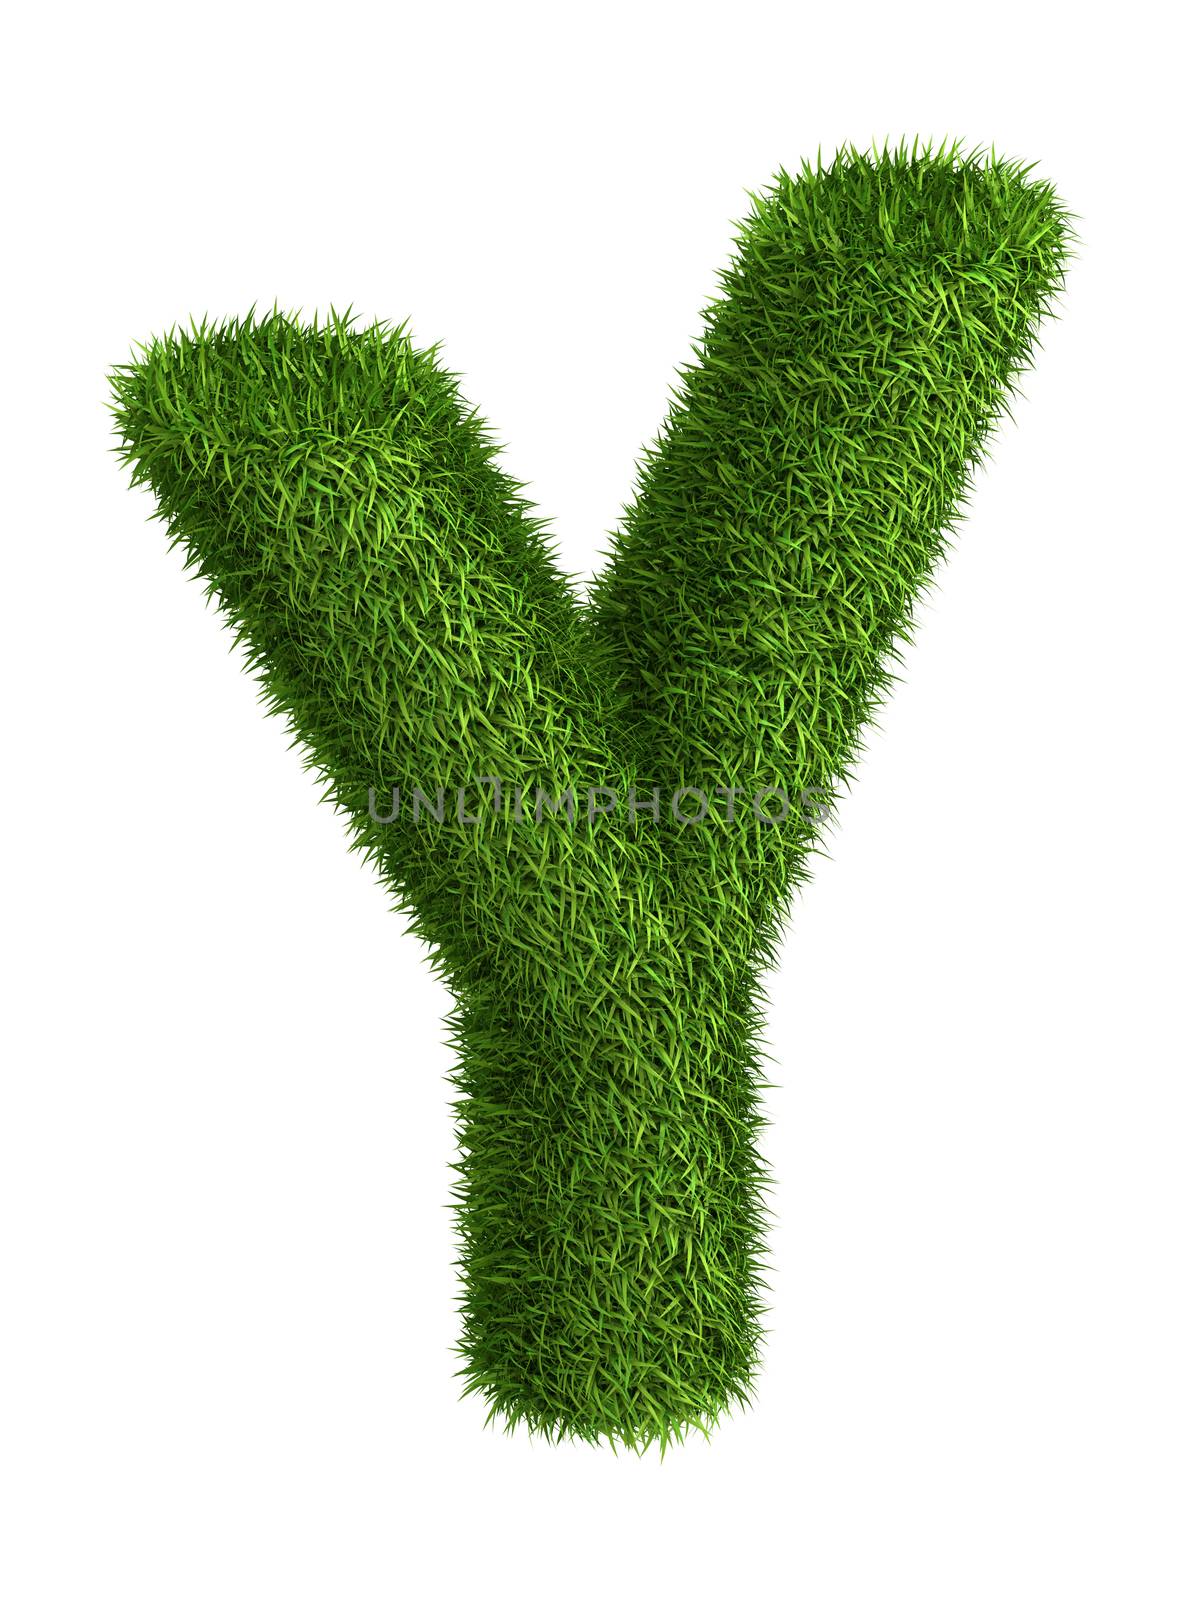 Natural grass letter Y by iunewind